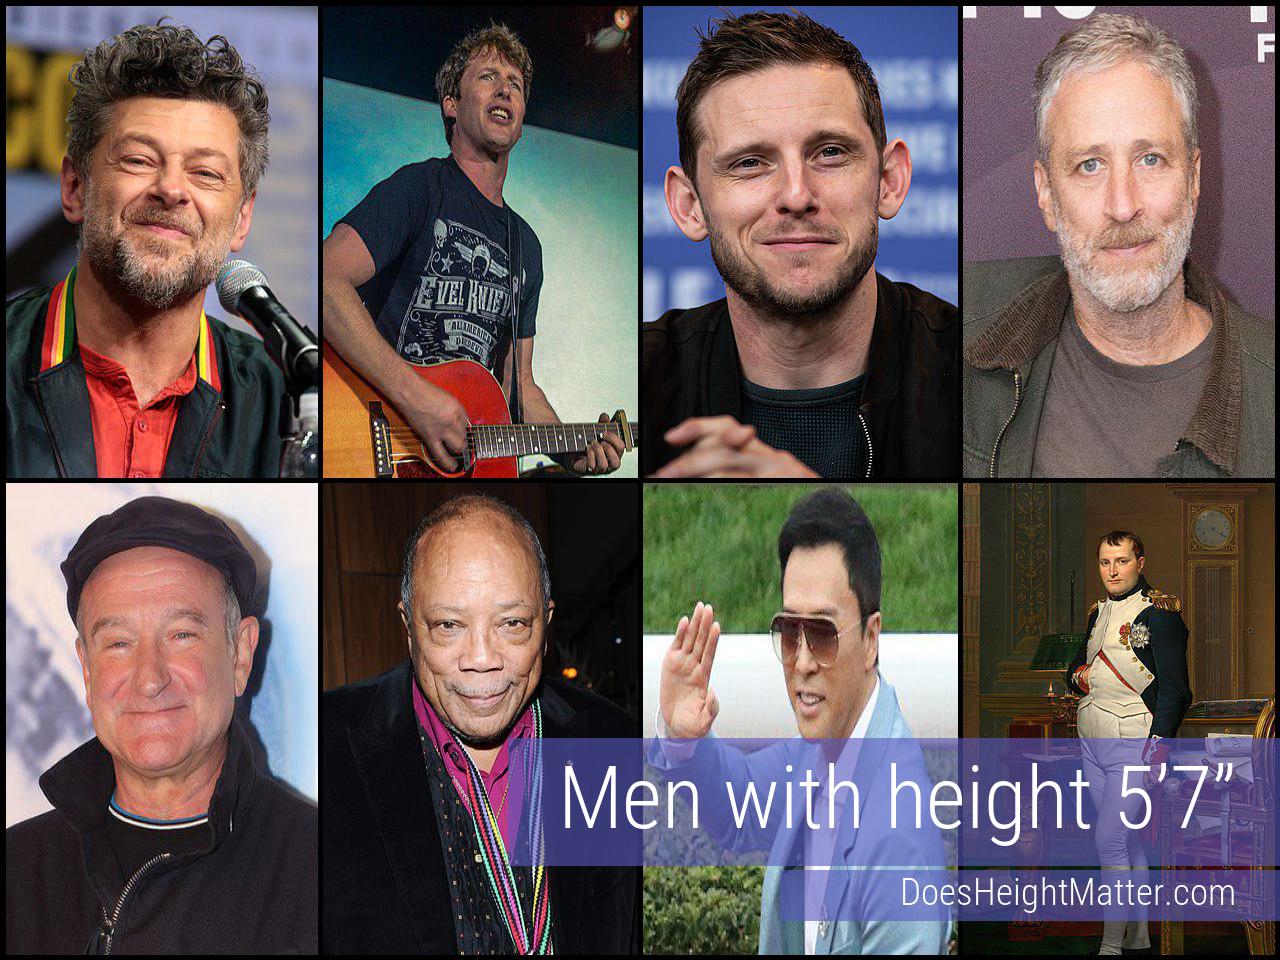 Male celebrities who are 5 ft 7